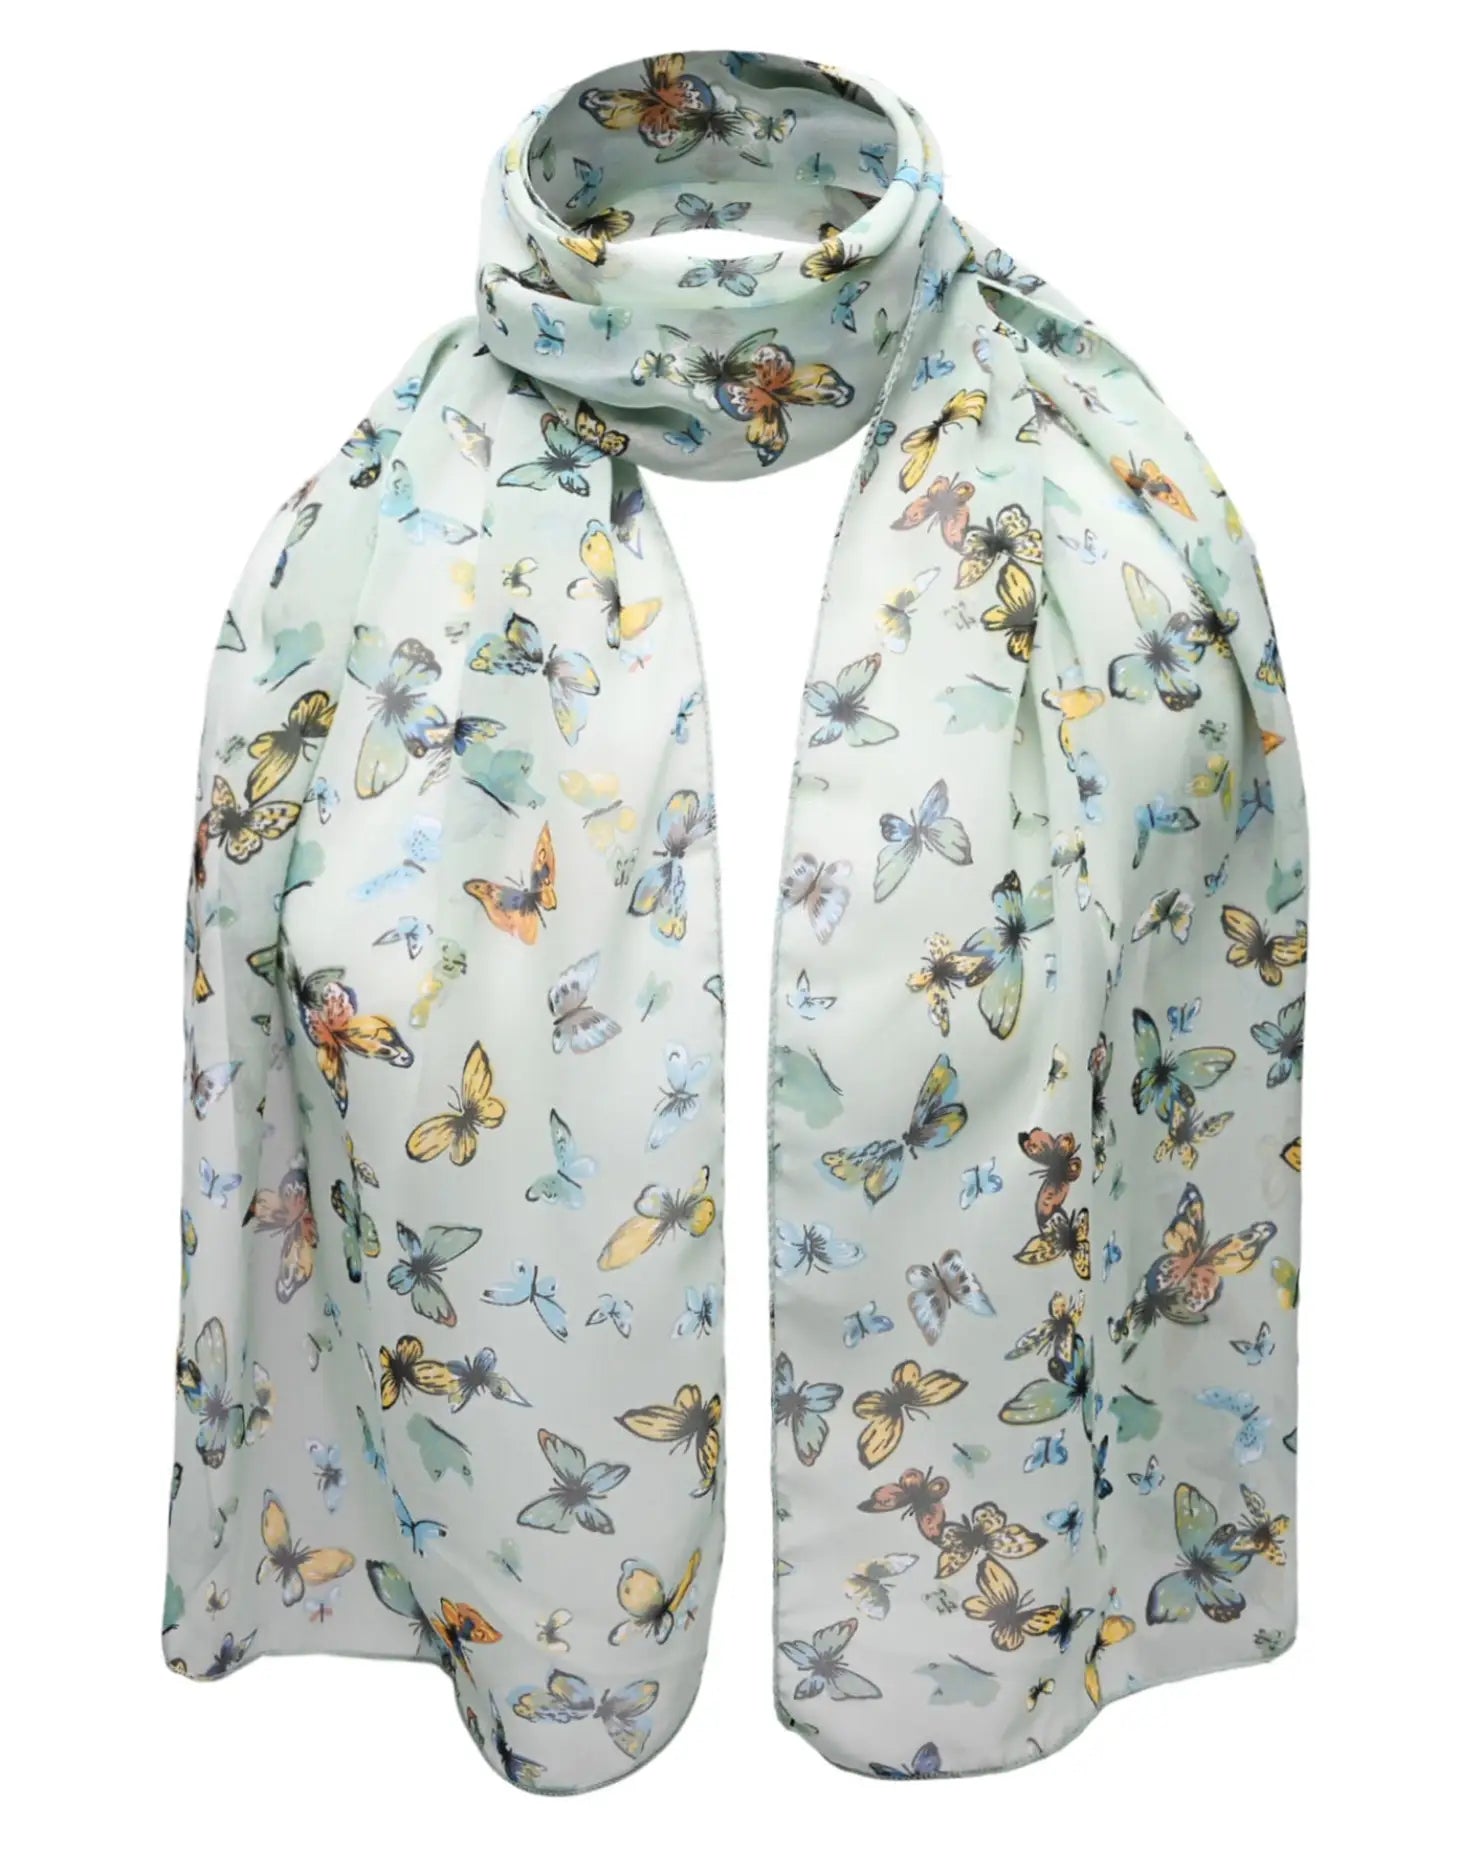 Butterfly Print Scarf: Soft and Lightweight Fashion Accessory